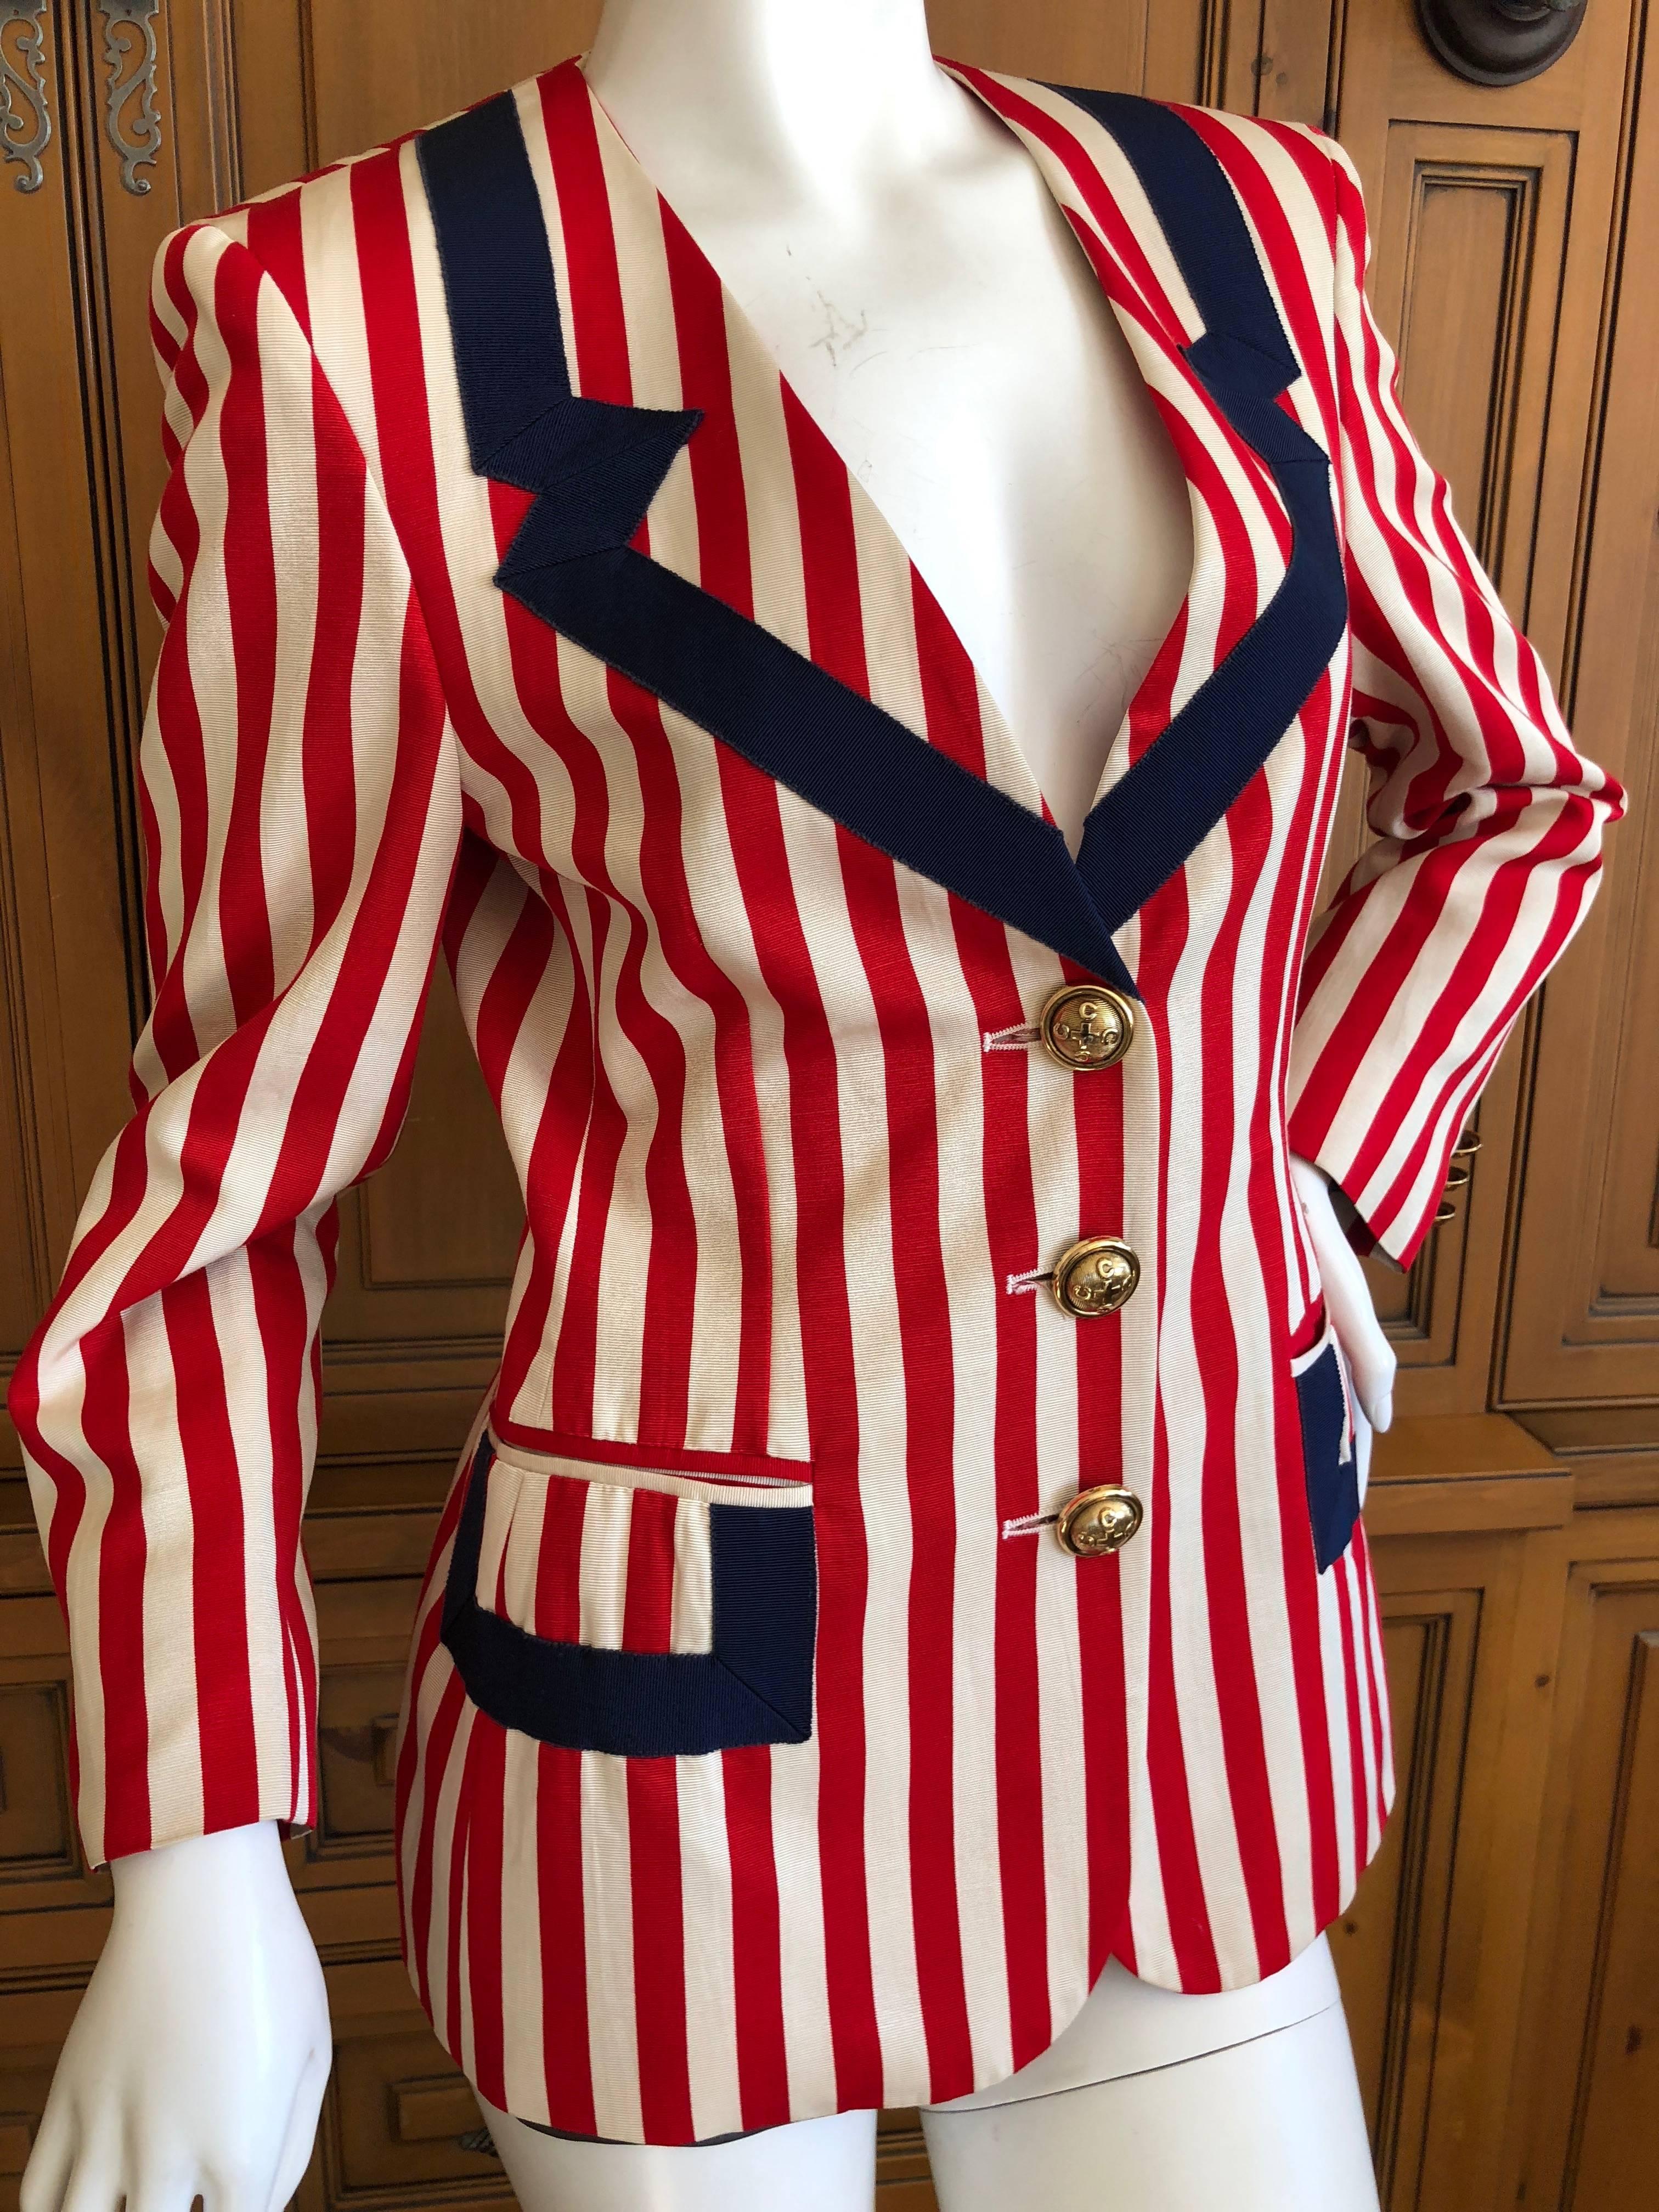 Moschino Vintage Cheap & Chic Red White and Blue Tromp l'oeil Grosgrain Jacket In Good Condition For Sale In Cloverdale, CA